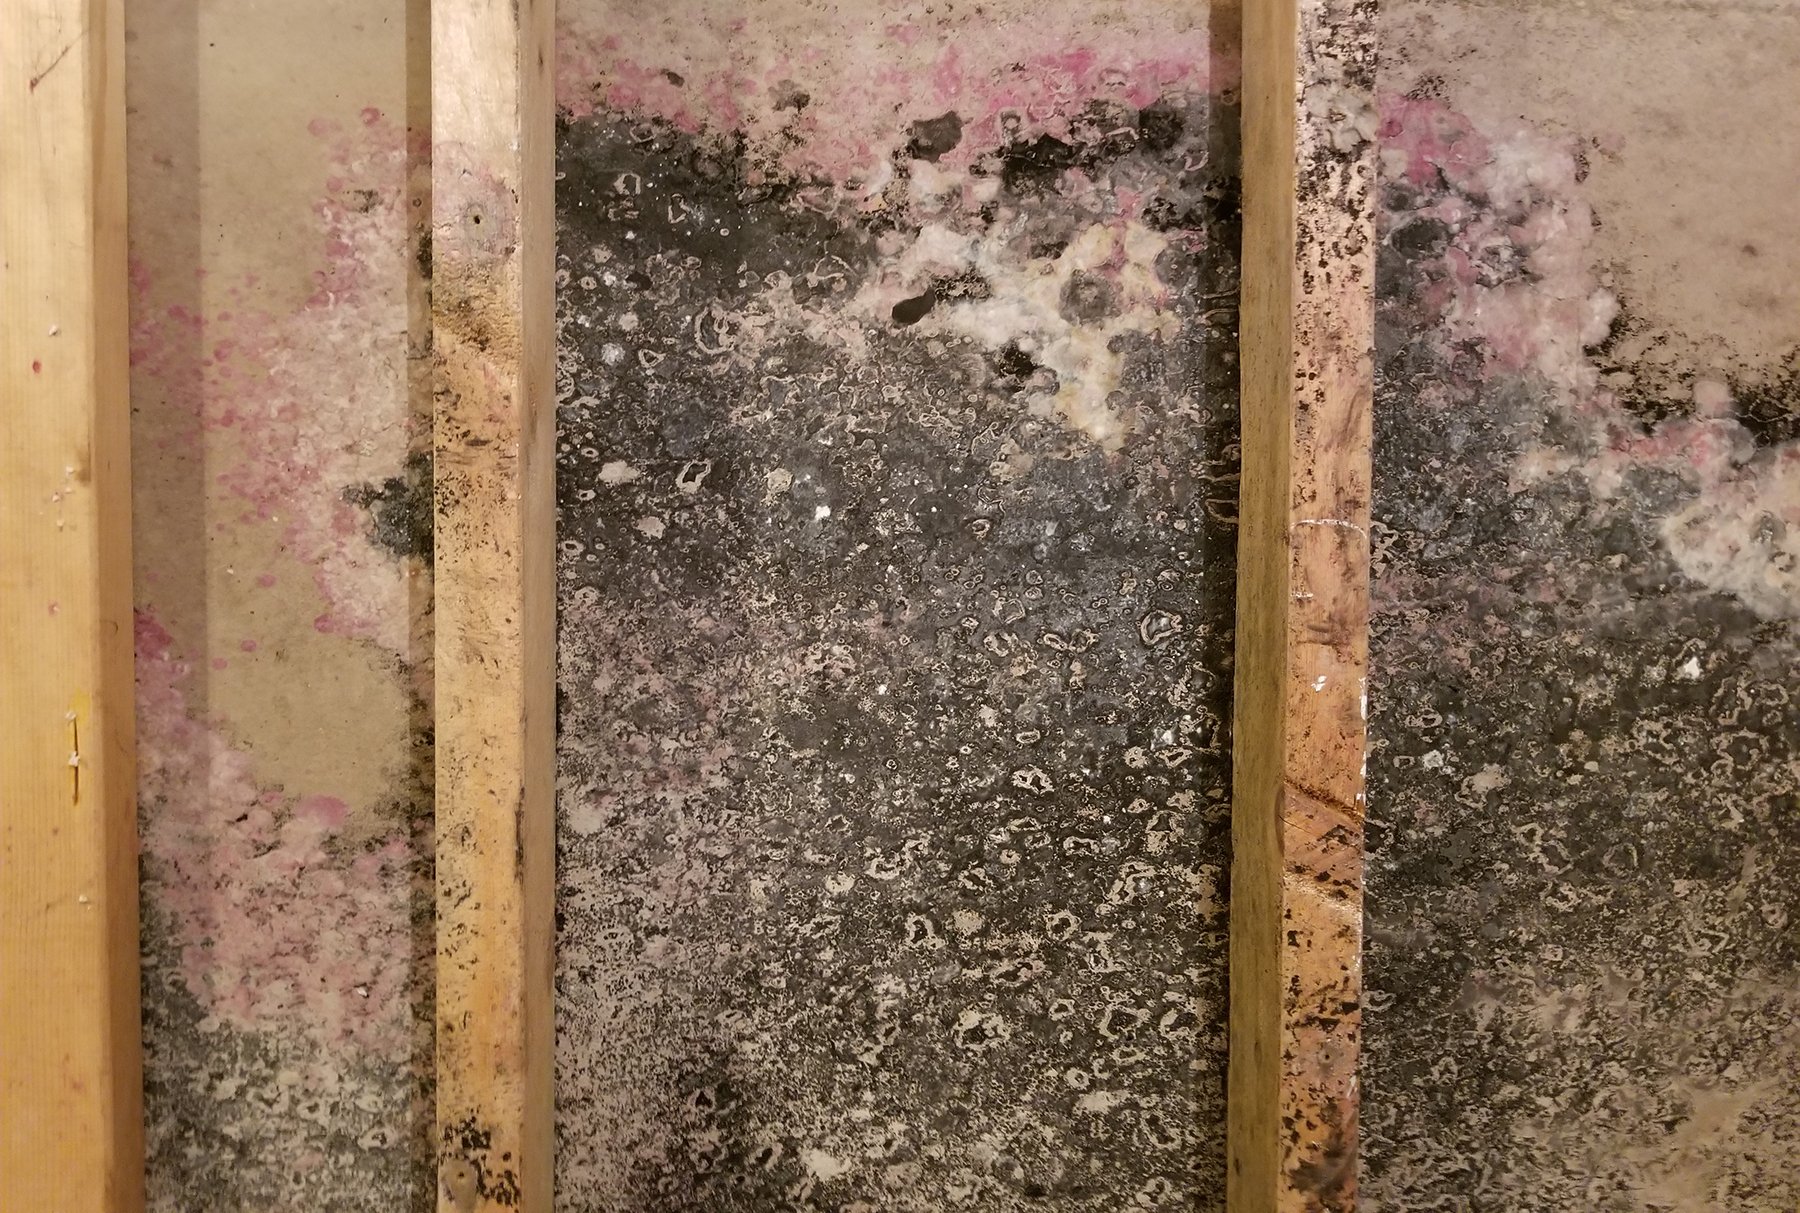 Black Mold Symptoms Removal and Cleaning